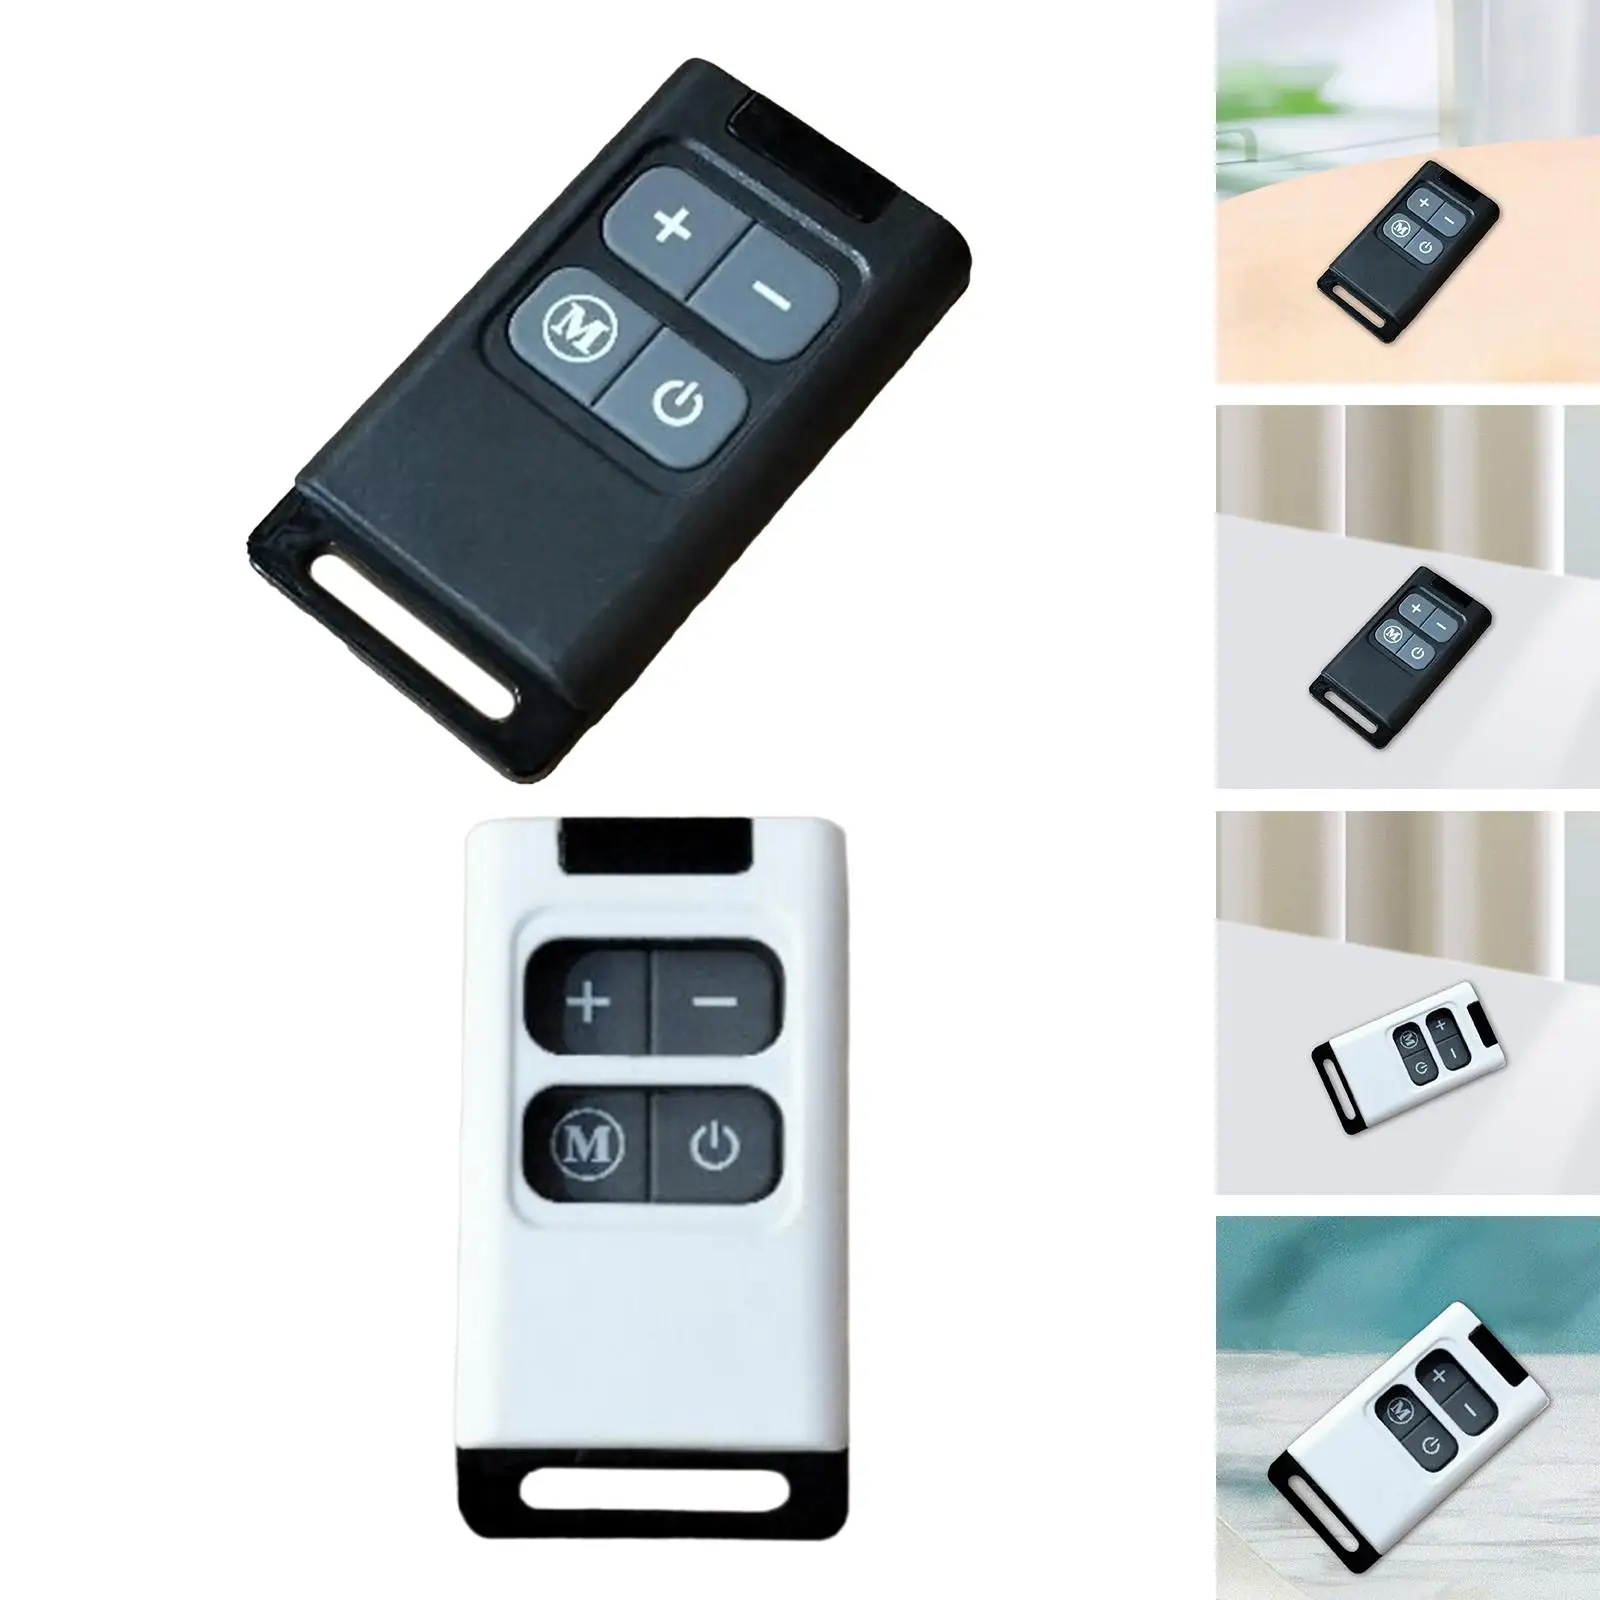 Car Parking Heater Remote Control for Air Parking Heater Vehicle Trucks